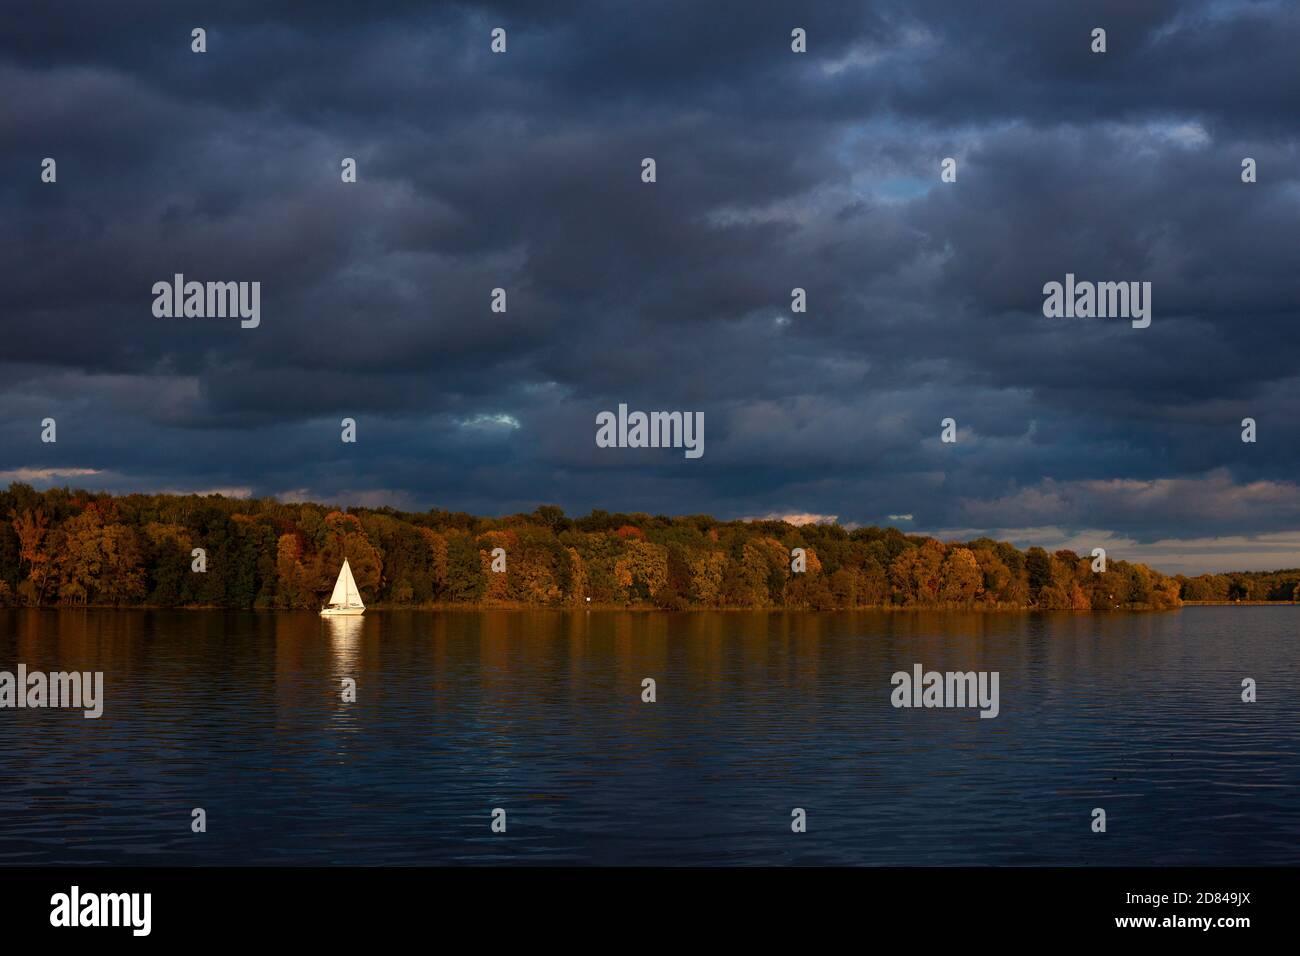 A sailboat catches the last light on an autumn evening, seen across the Jungfernsee from The Dairy in the New Garden in Potsdam, Germany Stock Photo